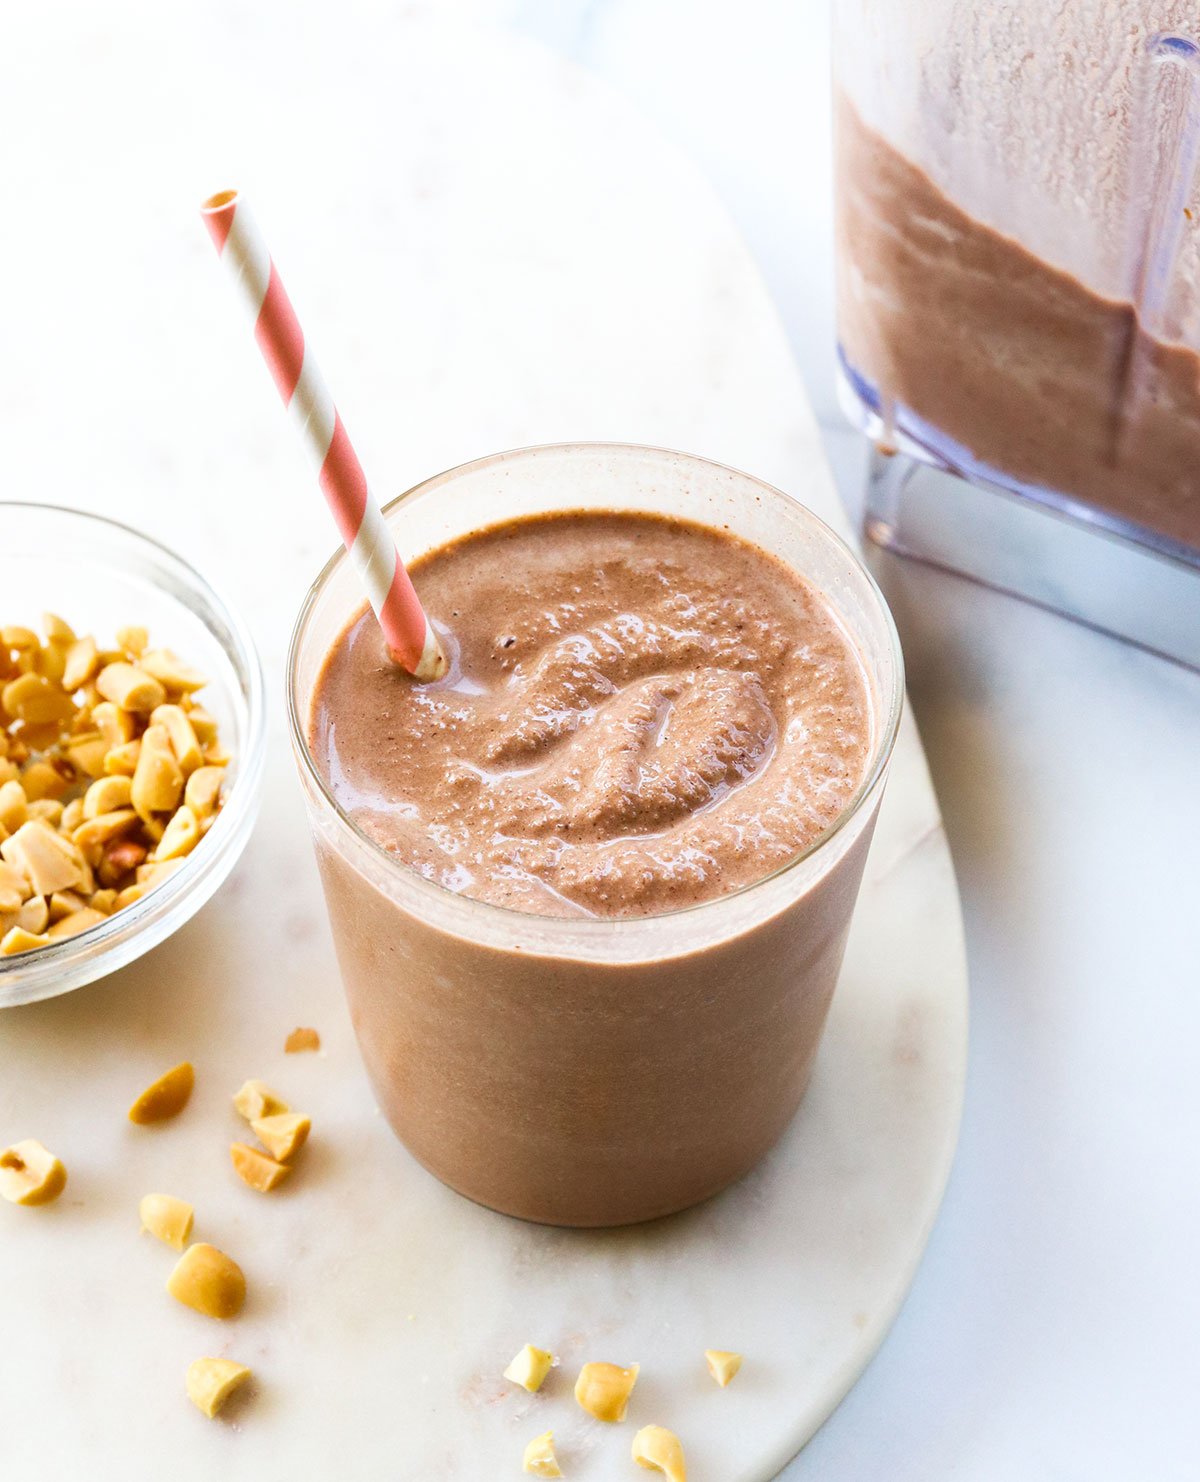 Chocolate peanut butter smoothie with a frosty texture in a glass.